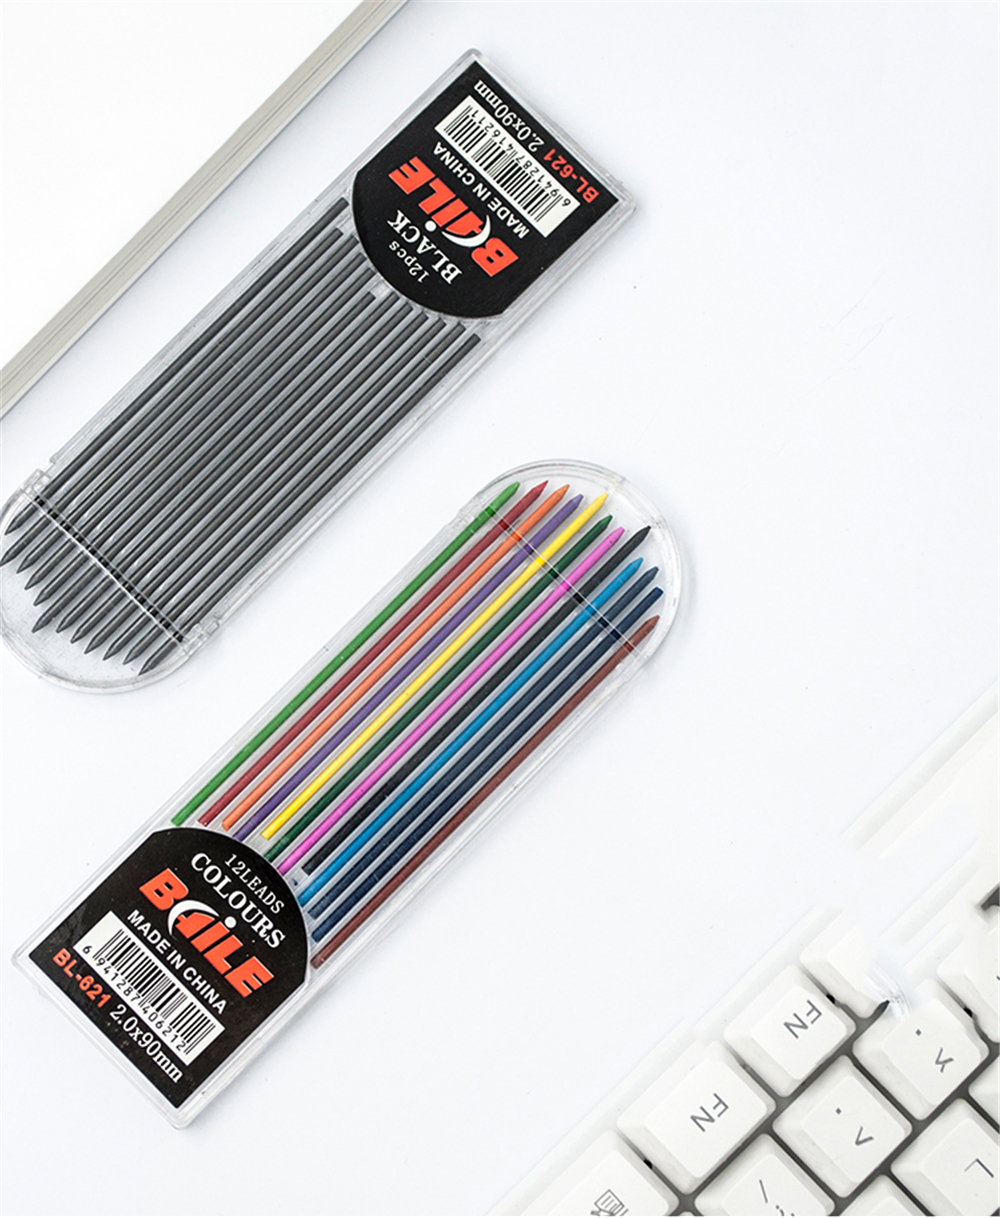 Baile-BL-621-12Color-Pen-Refill-Set-20-mm-Color-Lead-Refill-Resin-Pencil-Lead-Painting-Art-Drafting--1738579-5